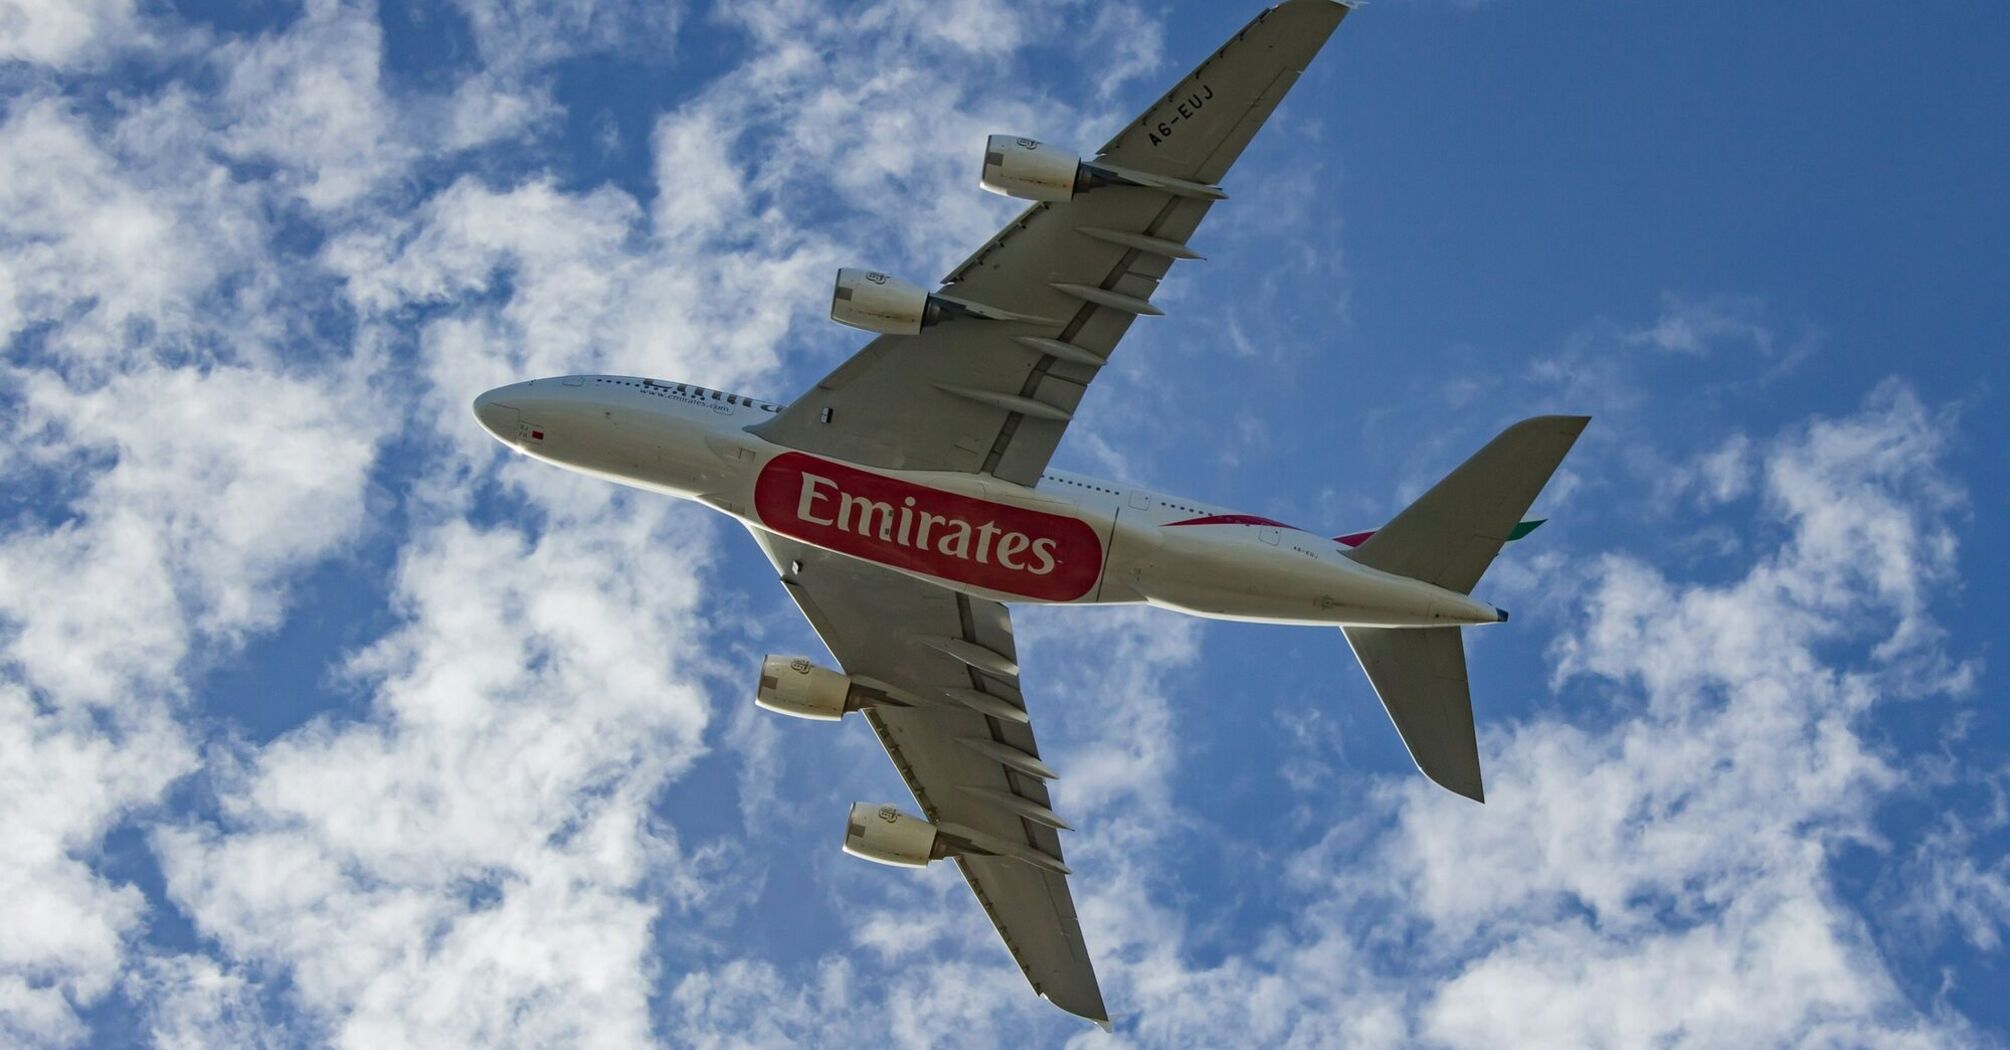 Emirates airplane flying in the sky